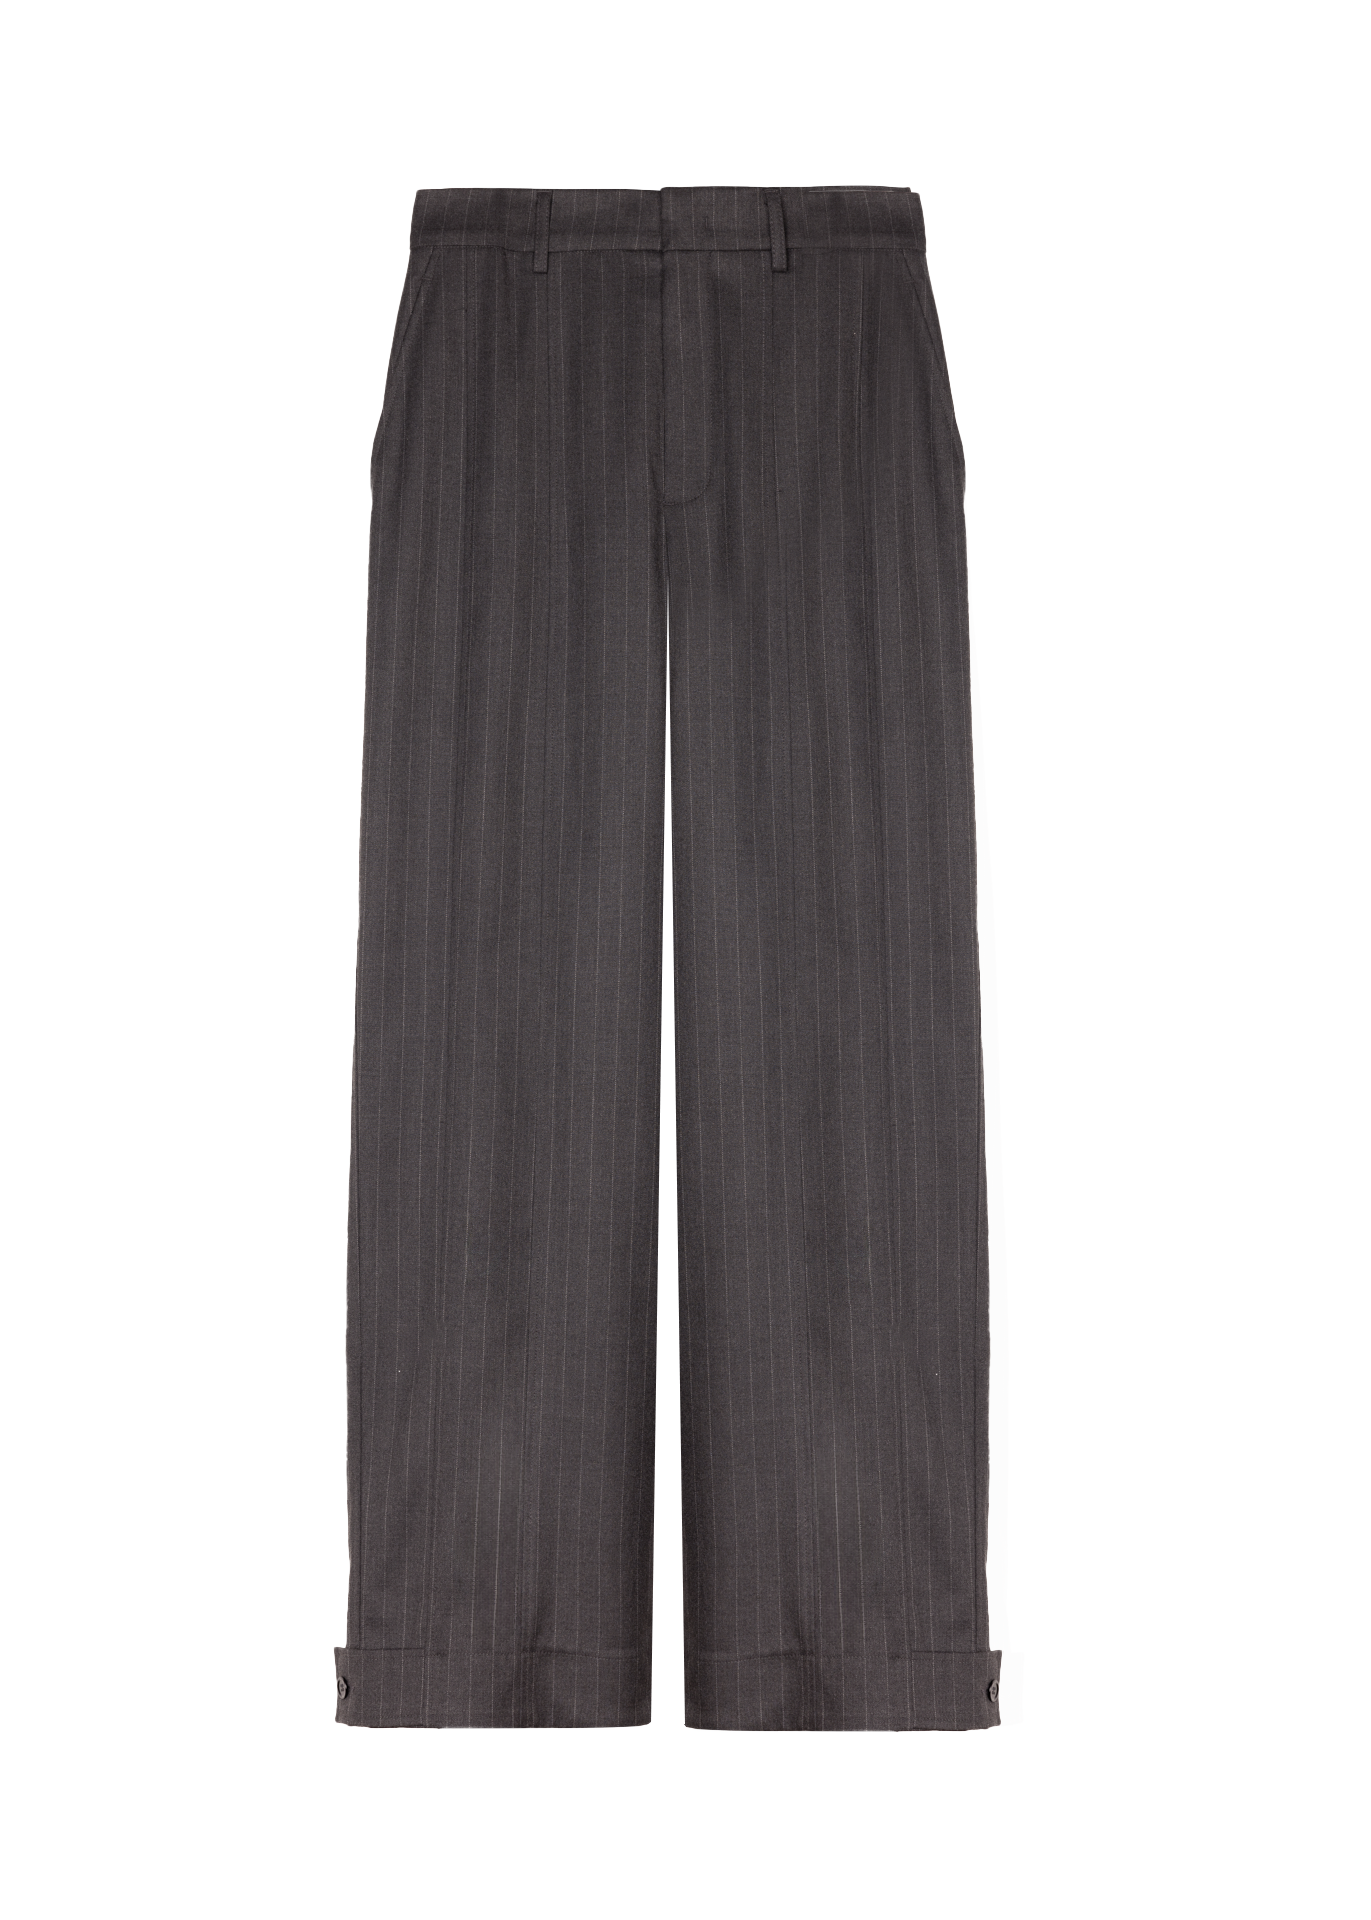 Tailored wide-leg, pinstriped trousers